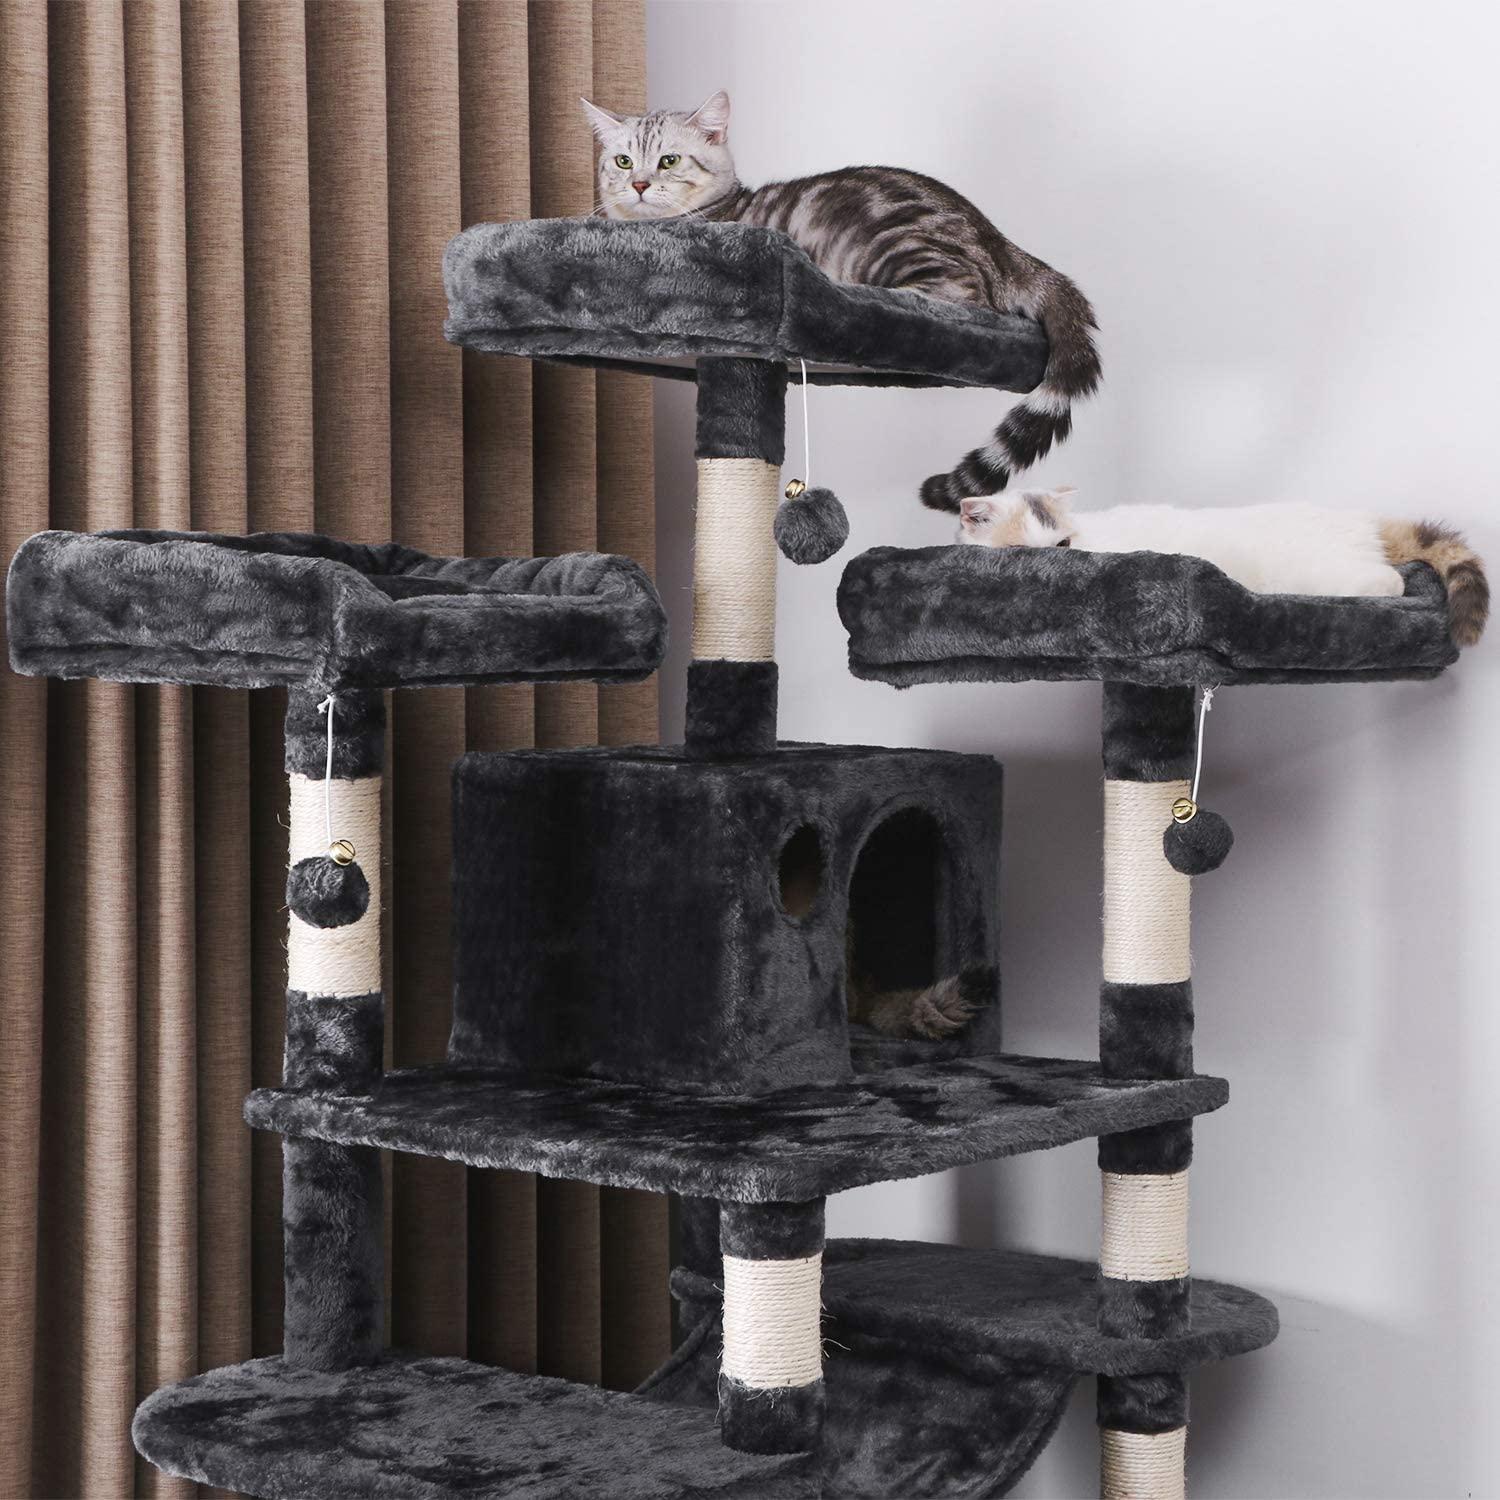 2022 manufacturer custom extra large 49 inches big cat activity black climbing tree house multilayer tower for large cats